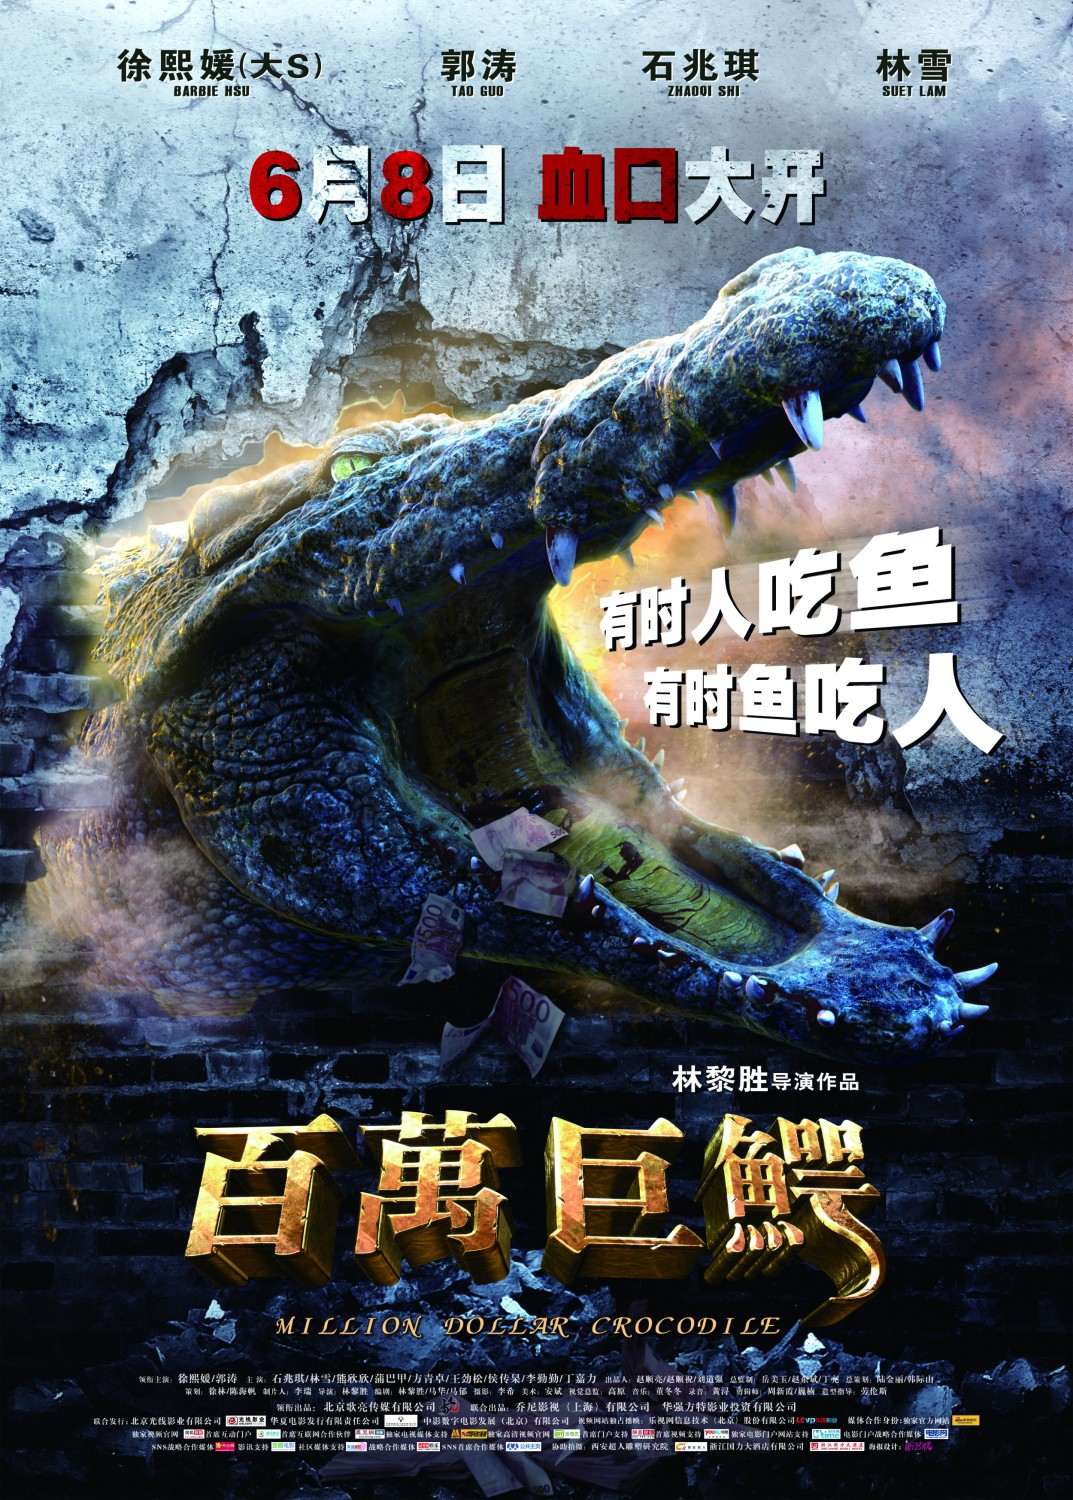 Extra Large Movie Poster Image for Million Dollar Crocodile (#1 of 5)